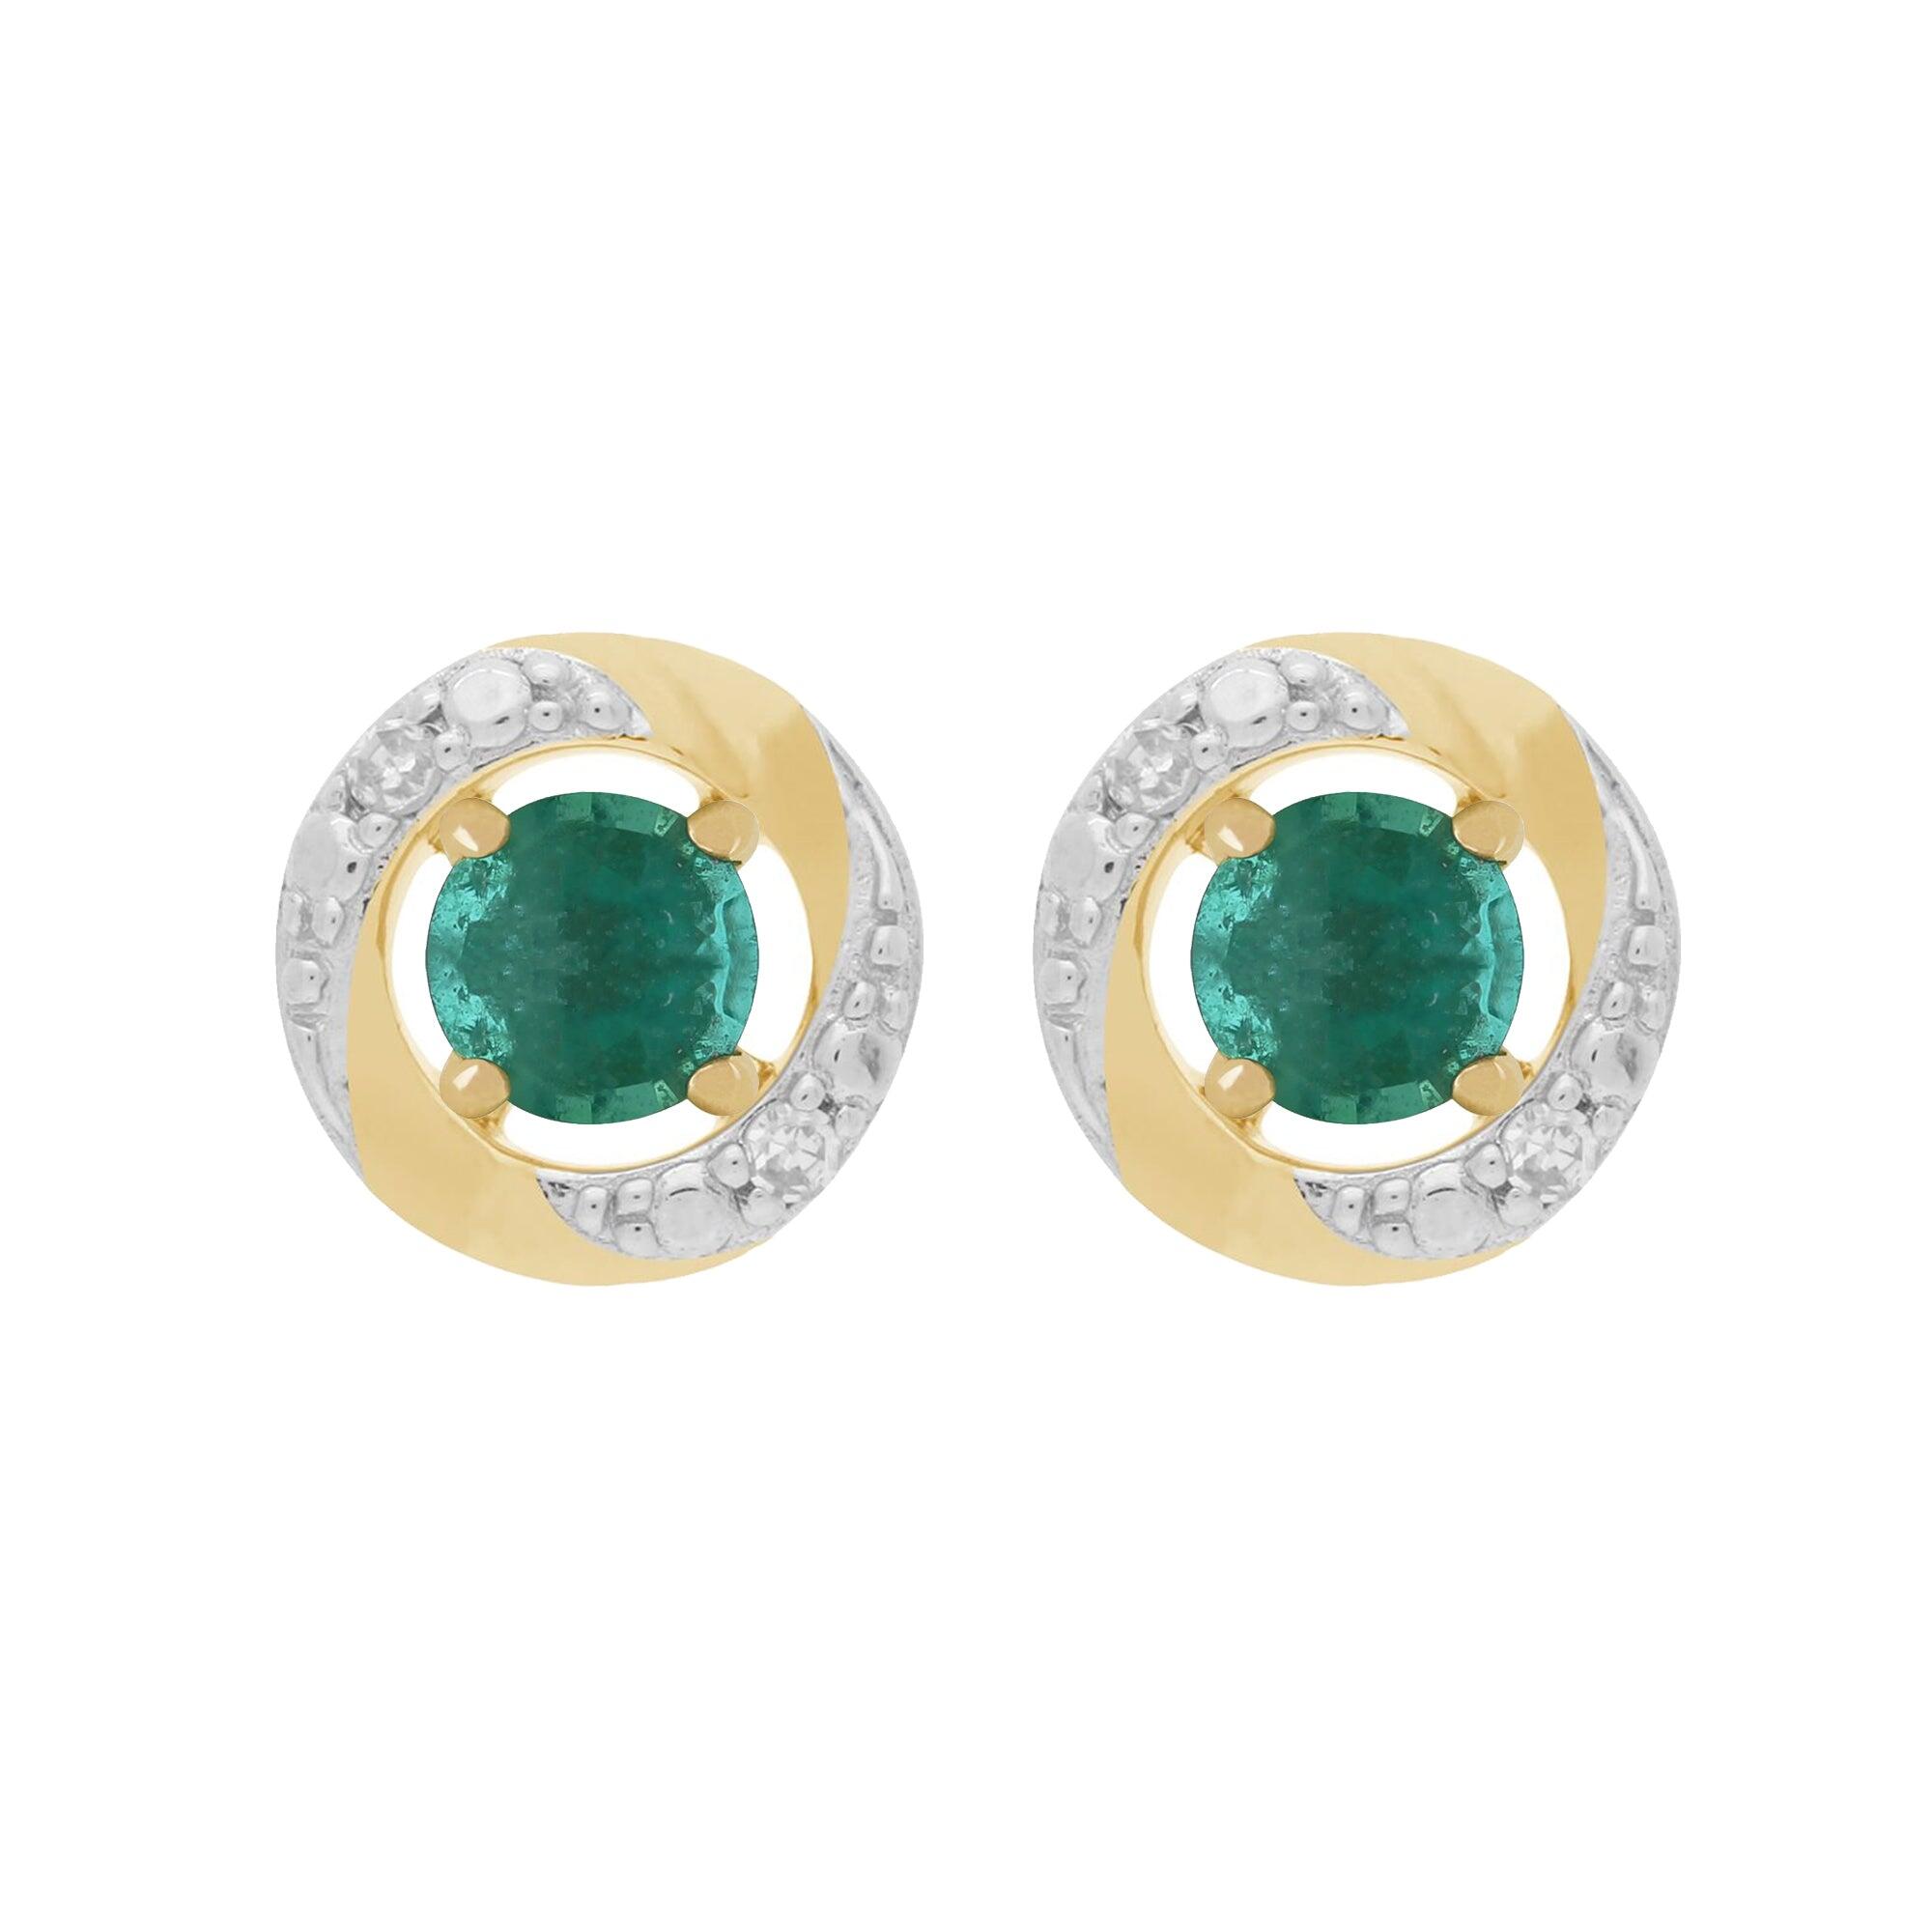 Classic Round Emerald Stud Earrings with Detachable Diamond Halo Ear Jacket in 9ct Yellow Gold